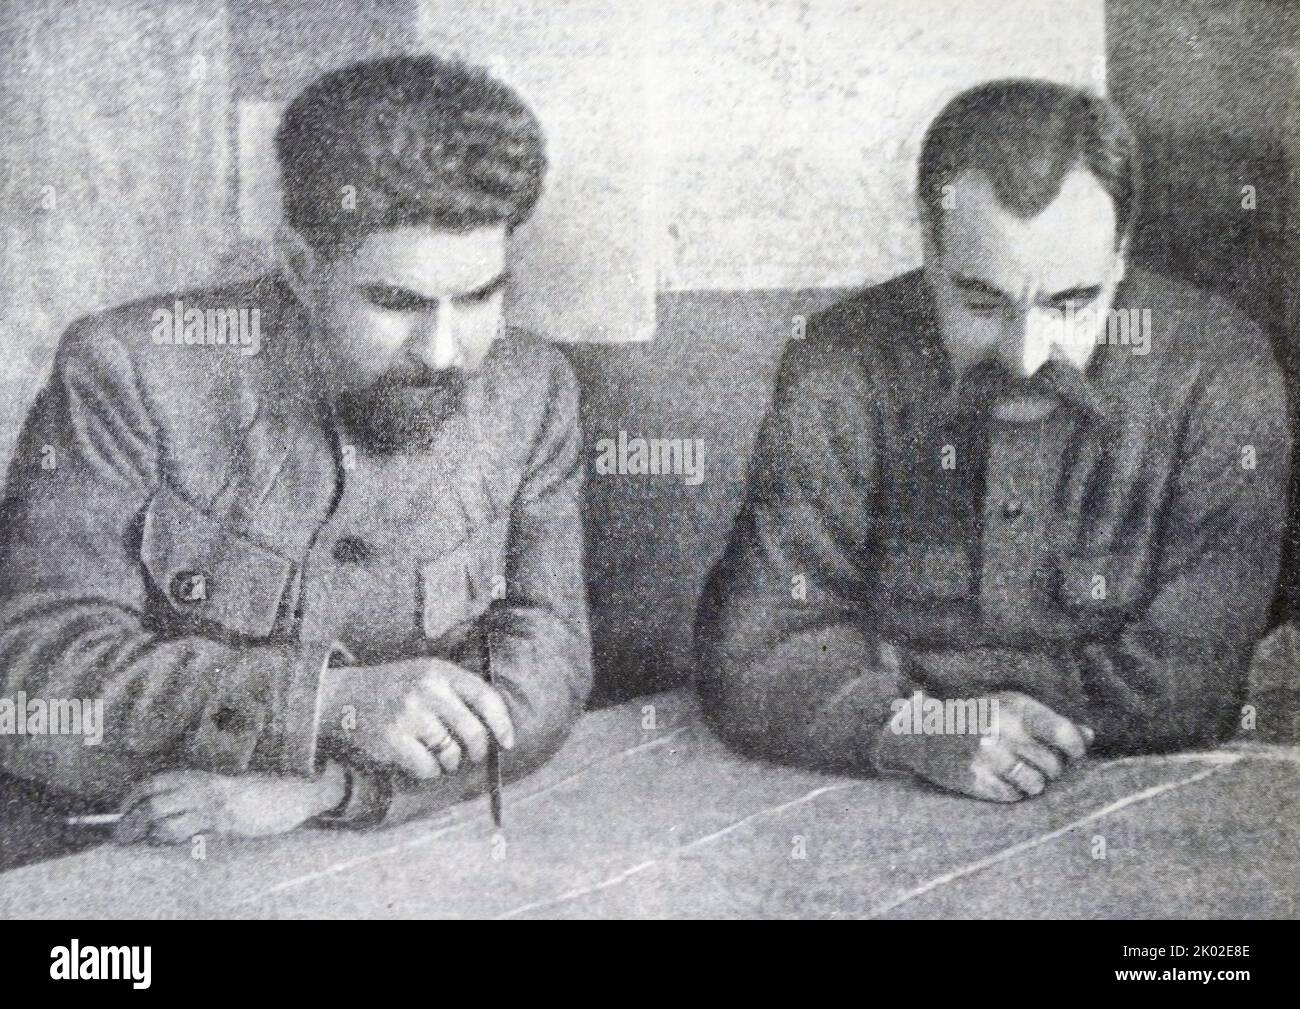 S. Kamenev - Commander-in-Chief of the Armed Forces of the Republic (right) and P.P. Lebedev - Chief of Staff. during the Russian Civil War 1919. Stock Photo